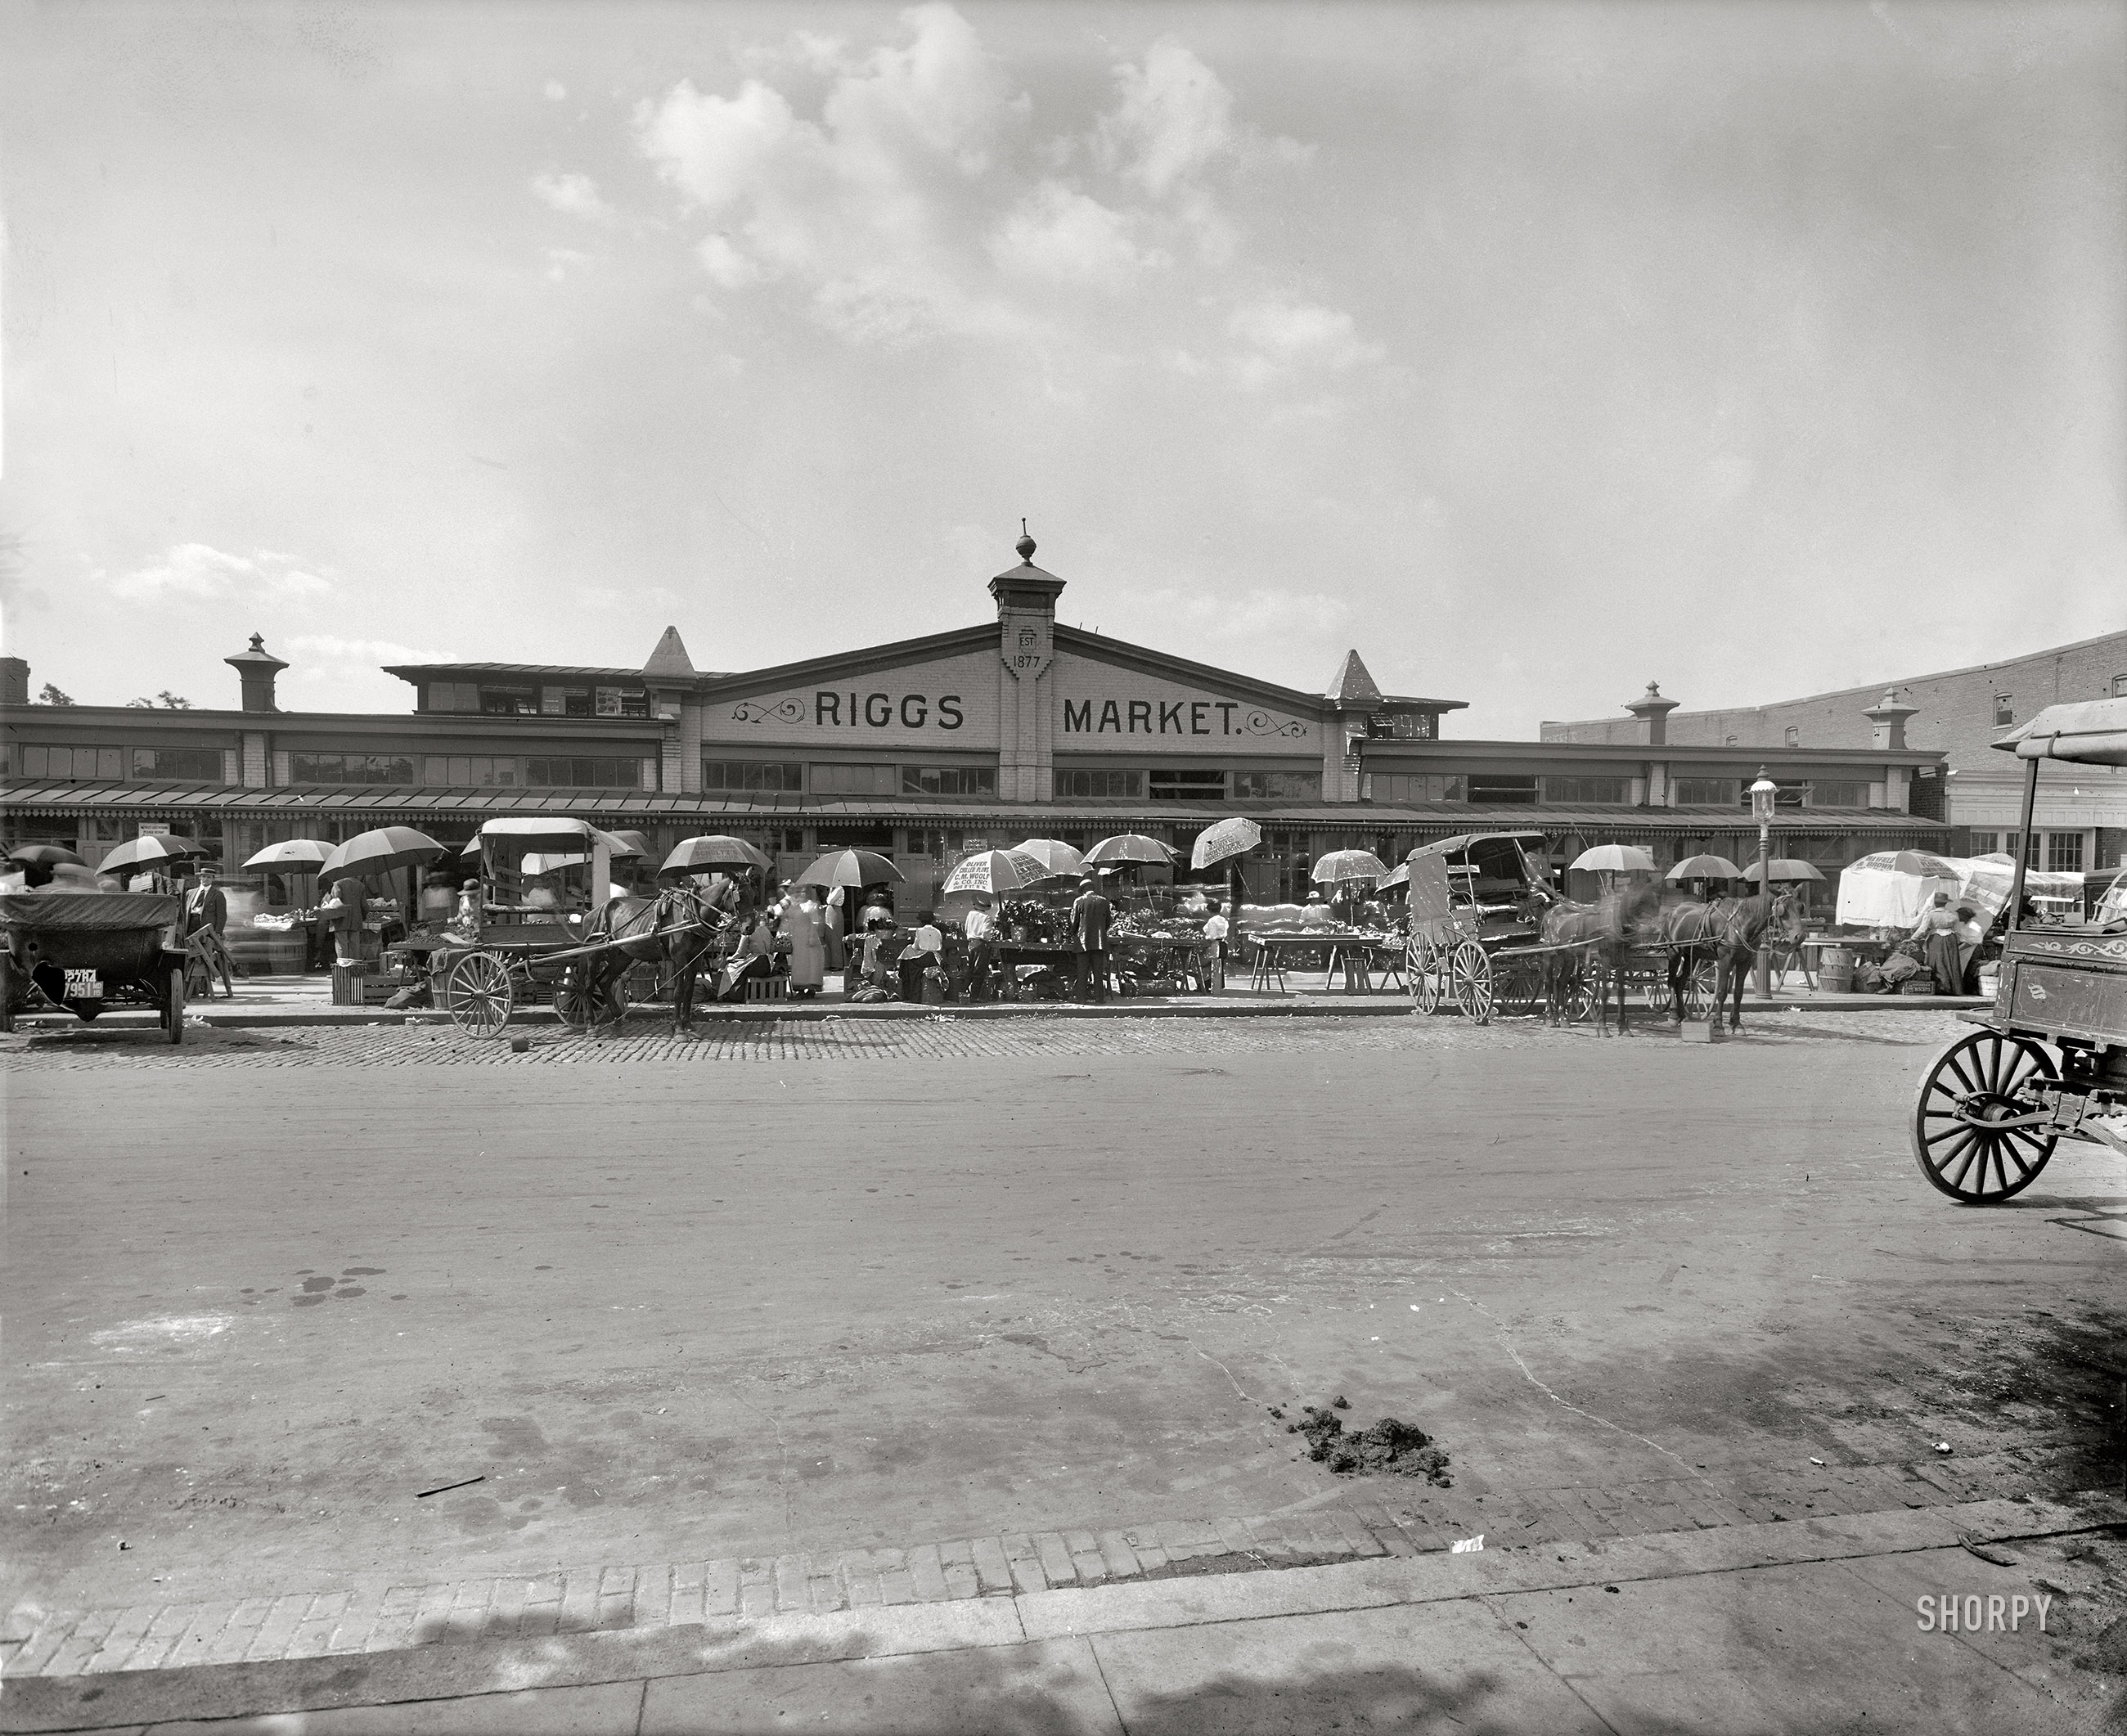 Washington, D.C., 1915. "Riggs Market." On P Street N.W. between 14th and 15th since 1877, it closed in December 1945 to make way for an automobile showroom, according to the Washington Post. 8x10 inch glass negative, National Photo Company Collection. View full size.